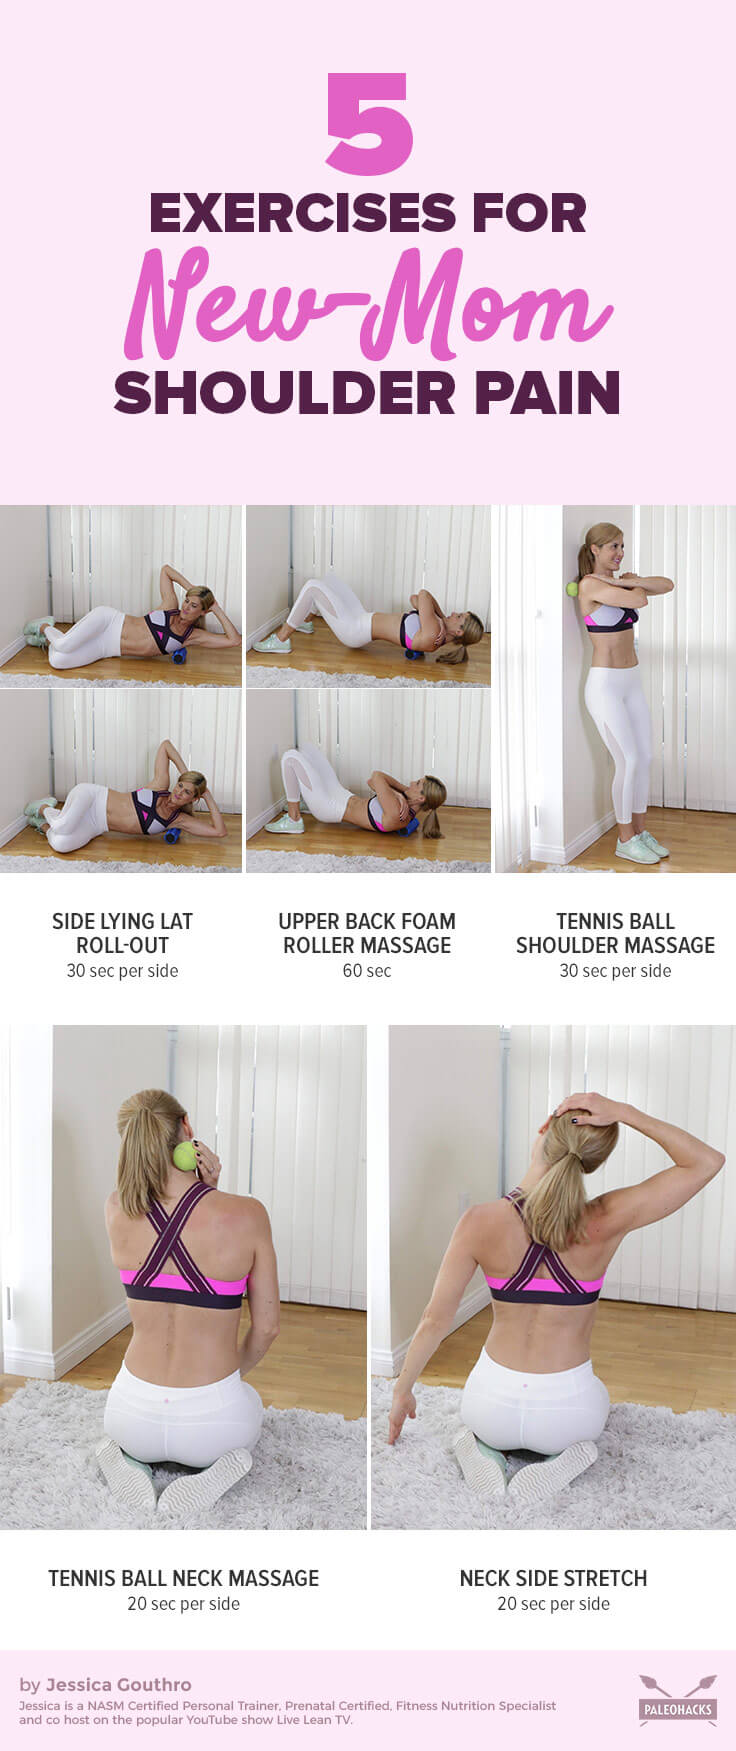 Soothe your new-mom shoulder pain with these easy moves to massage and stretch strained muscles. All you need is a foam roller and a tennis ball!